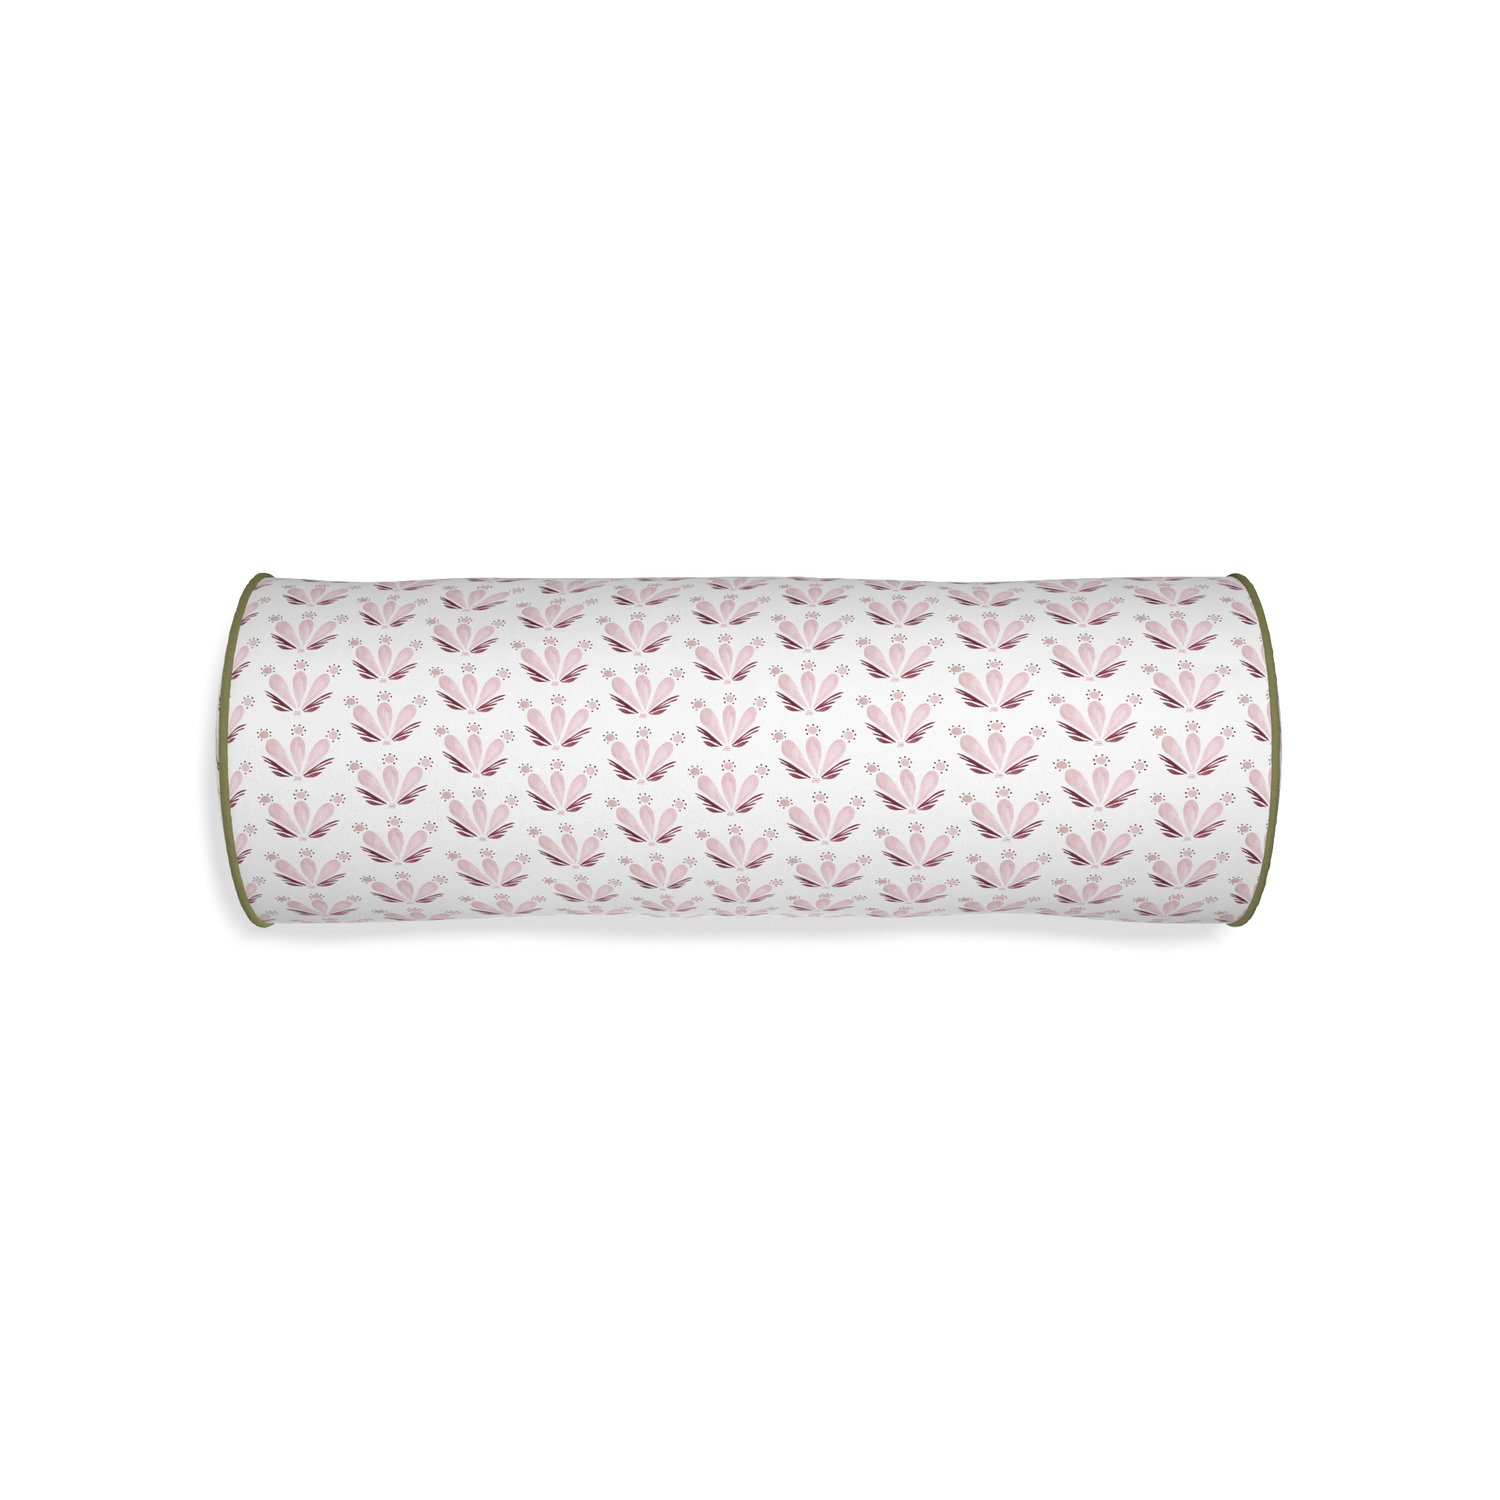 Bolster serena pink custom pillow with moss piping on white background